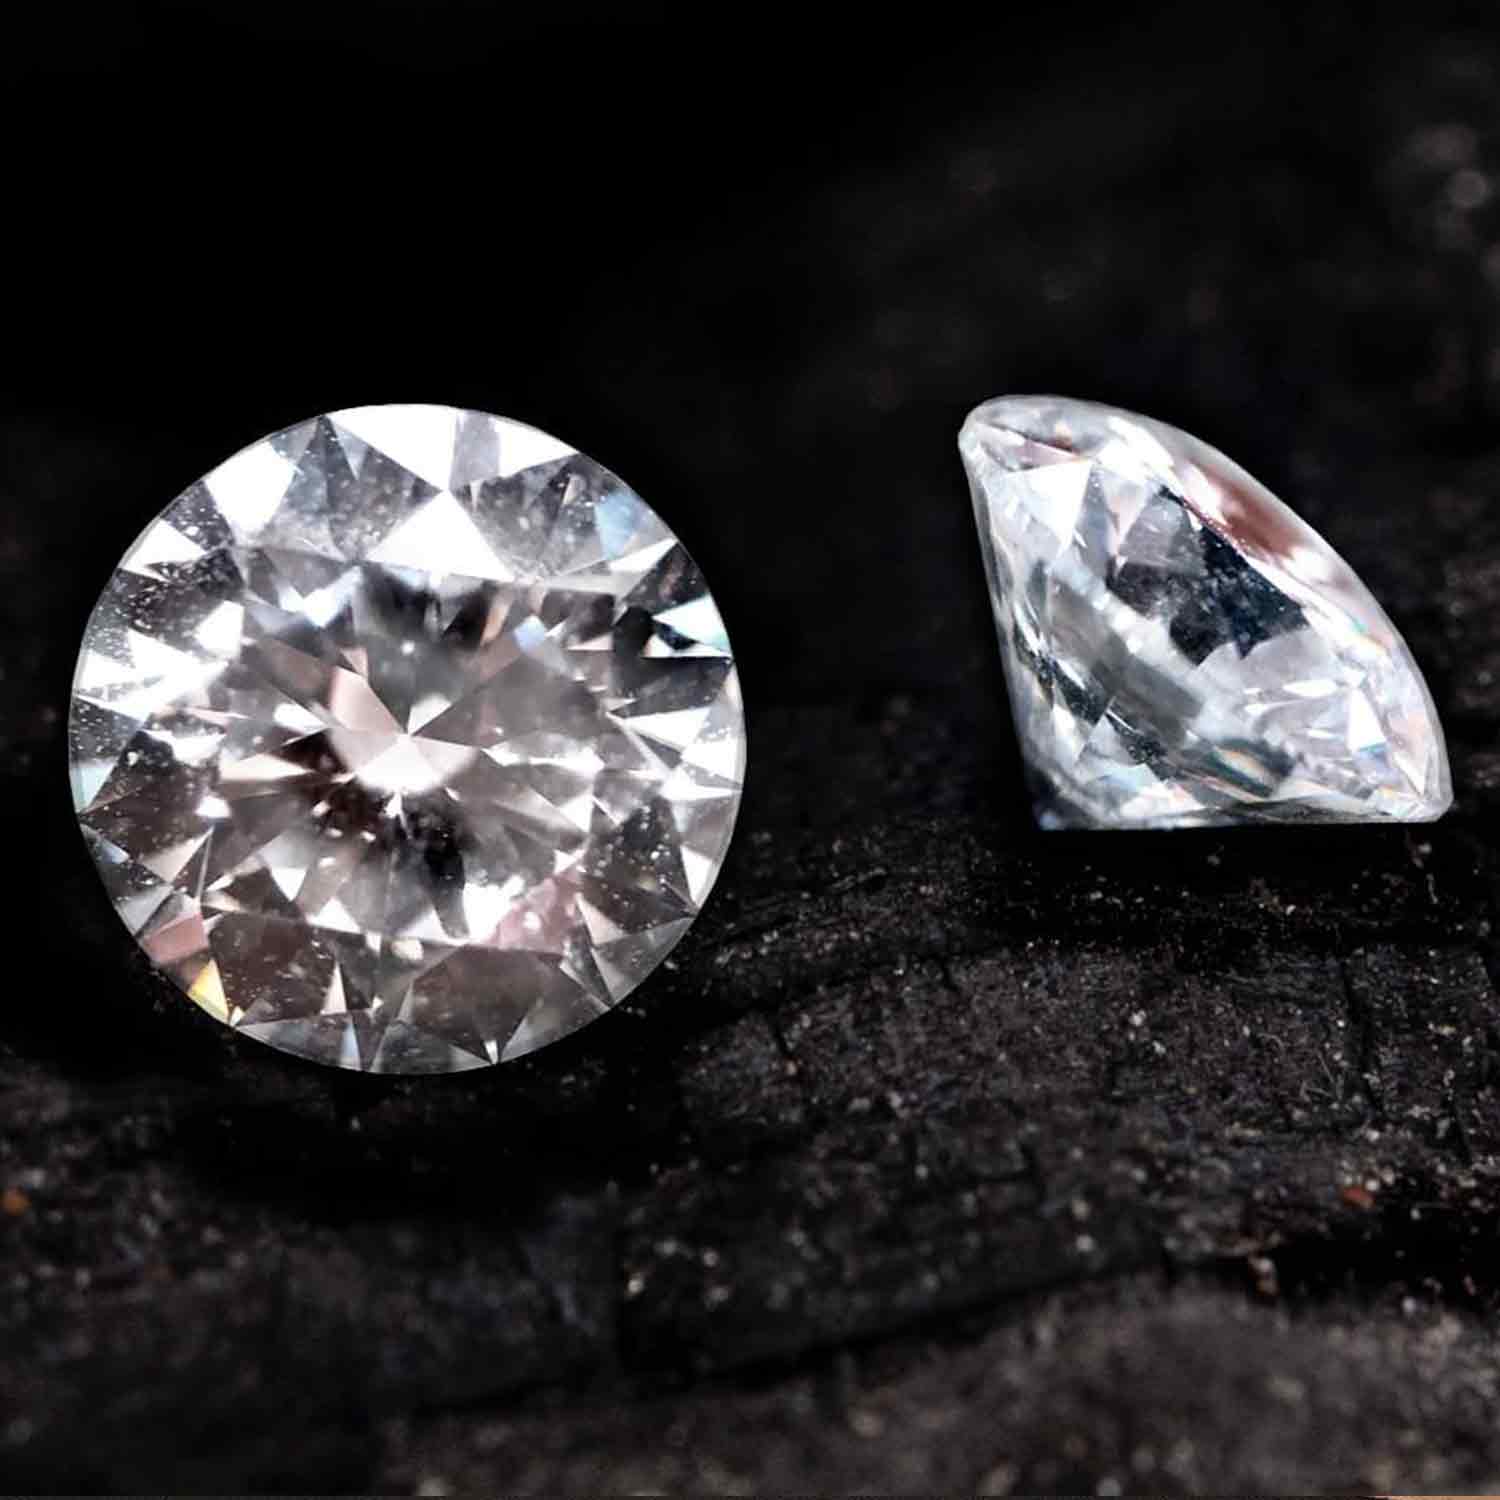 Two natural diamonds in front of a black background 